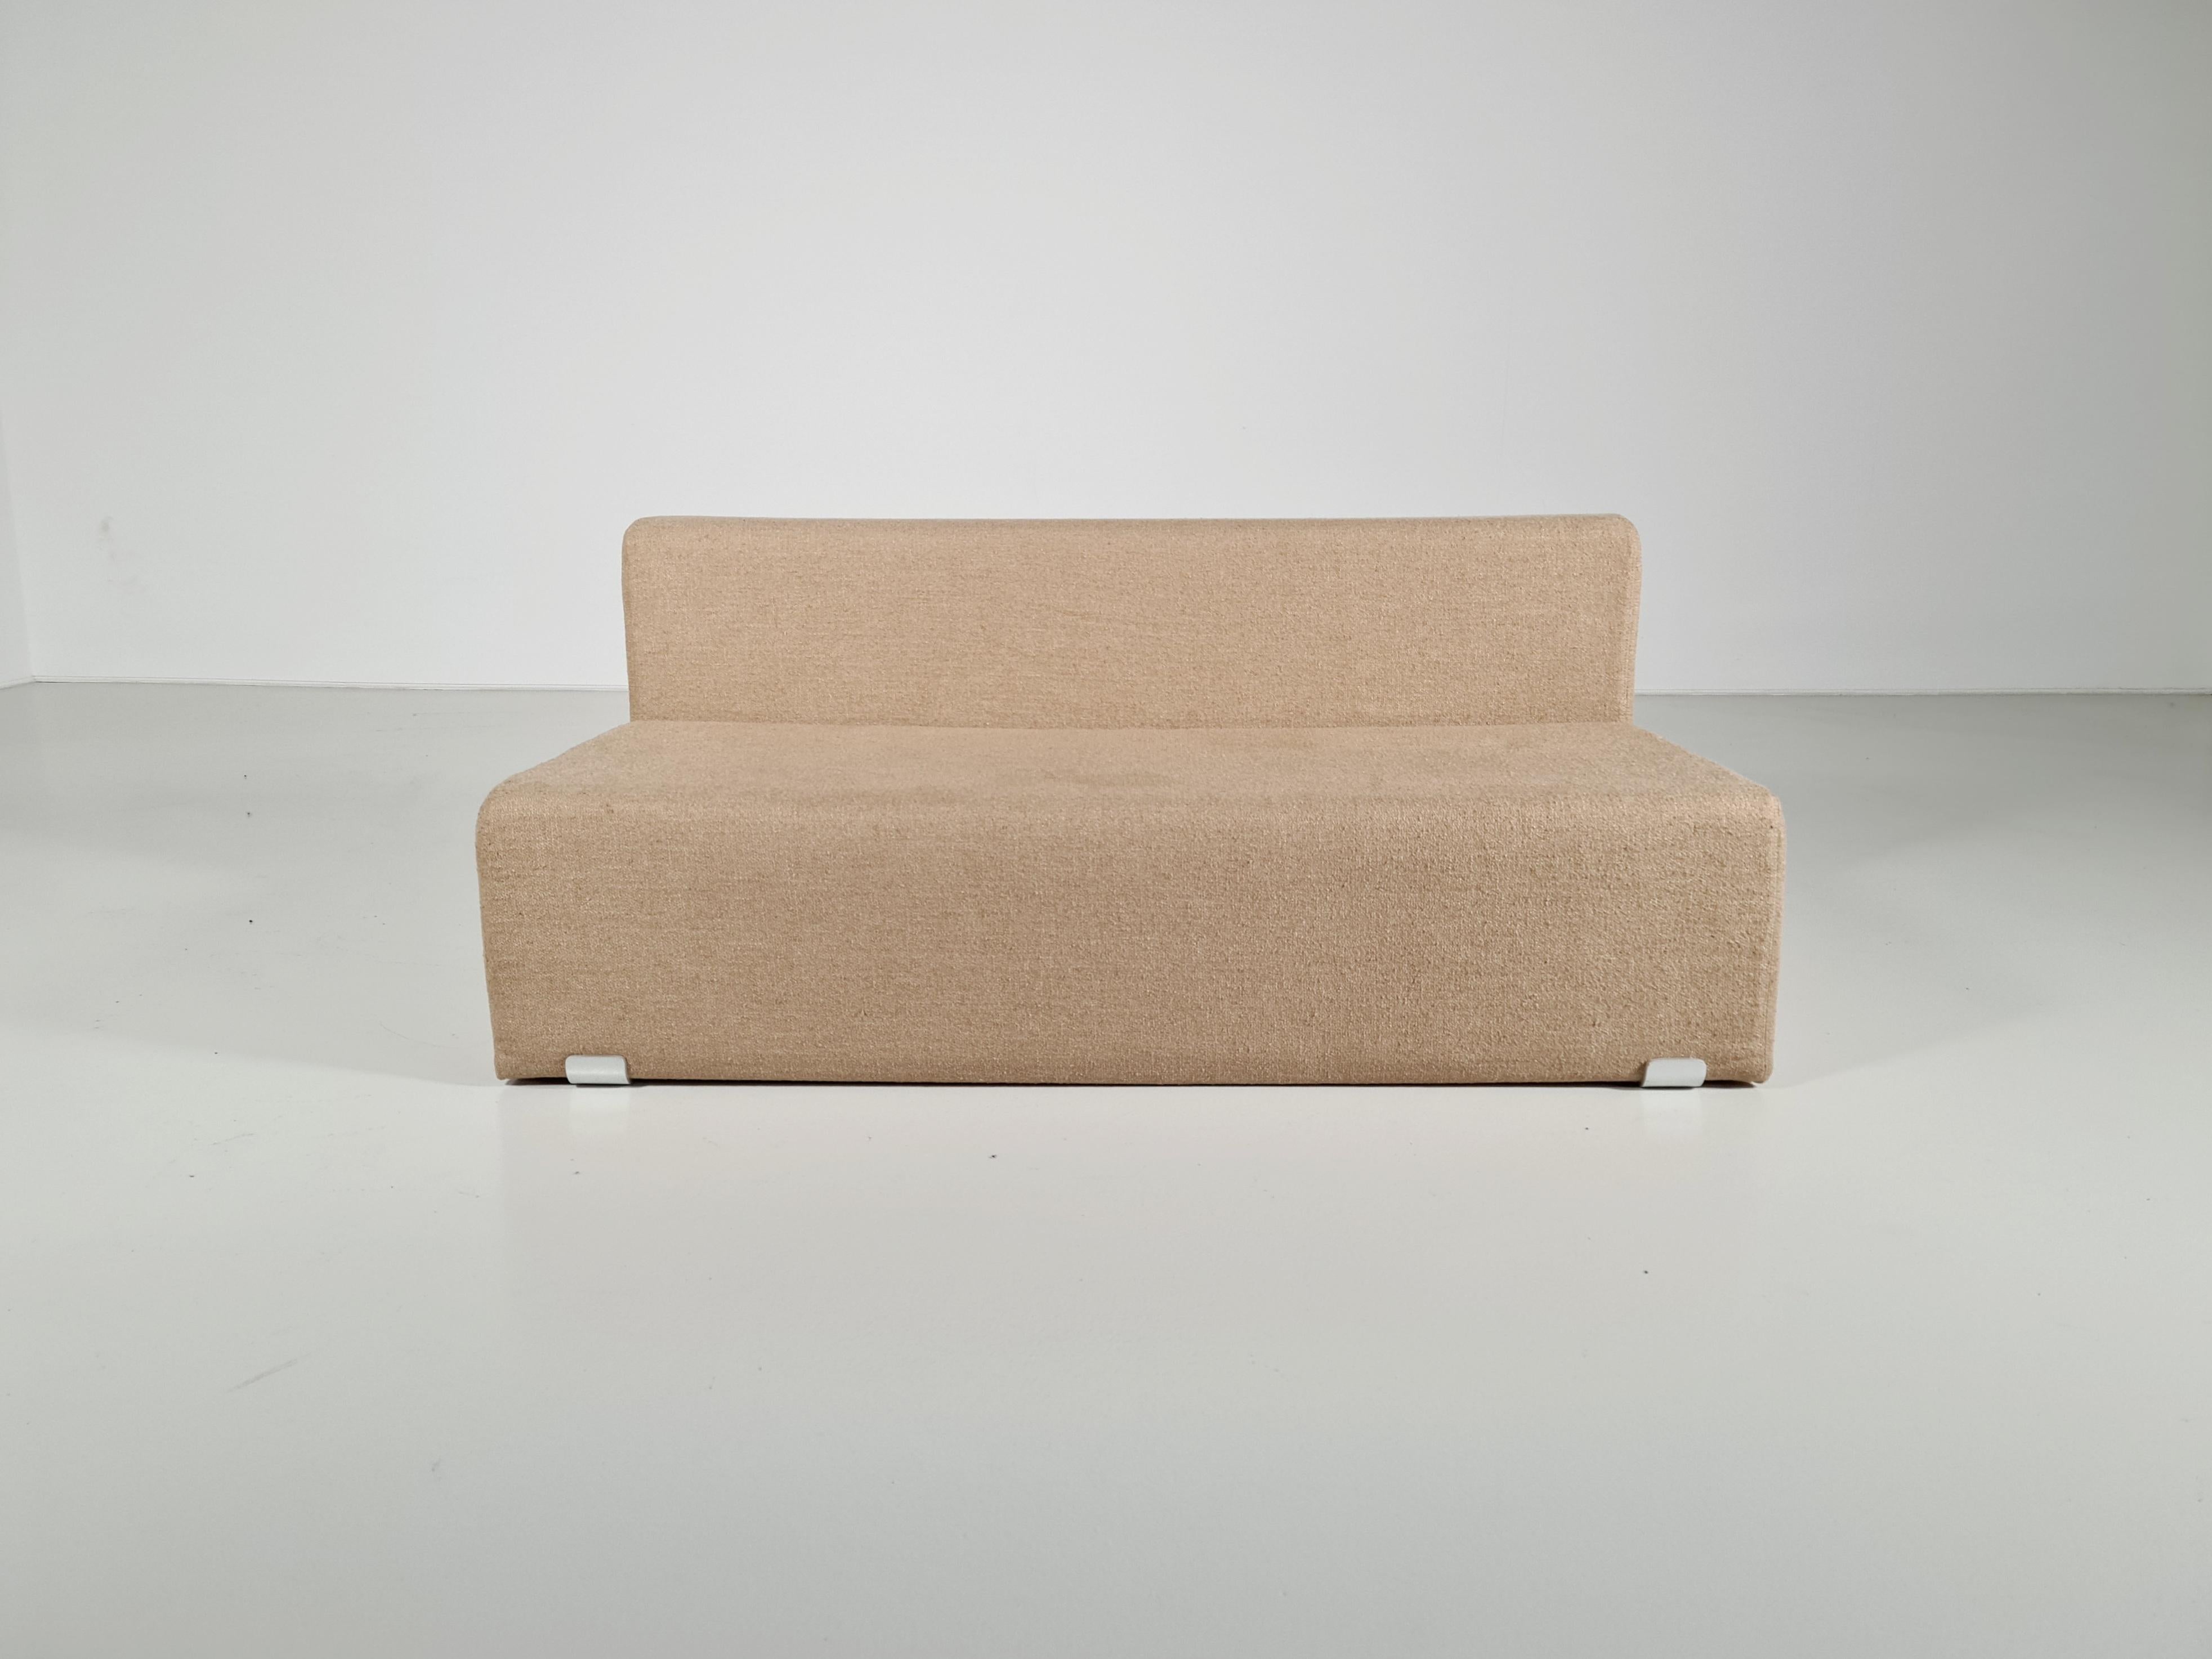 Marcel 2-seater sofa, designed by Kazuhide Takahama and manufactured by Gavina, features a shaped polyurethane structure with polished aluminum brackets. Reupholstered in a beautiful beige Tactile bouclé by Kirkby Design. The Marcel collection, a